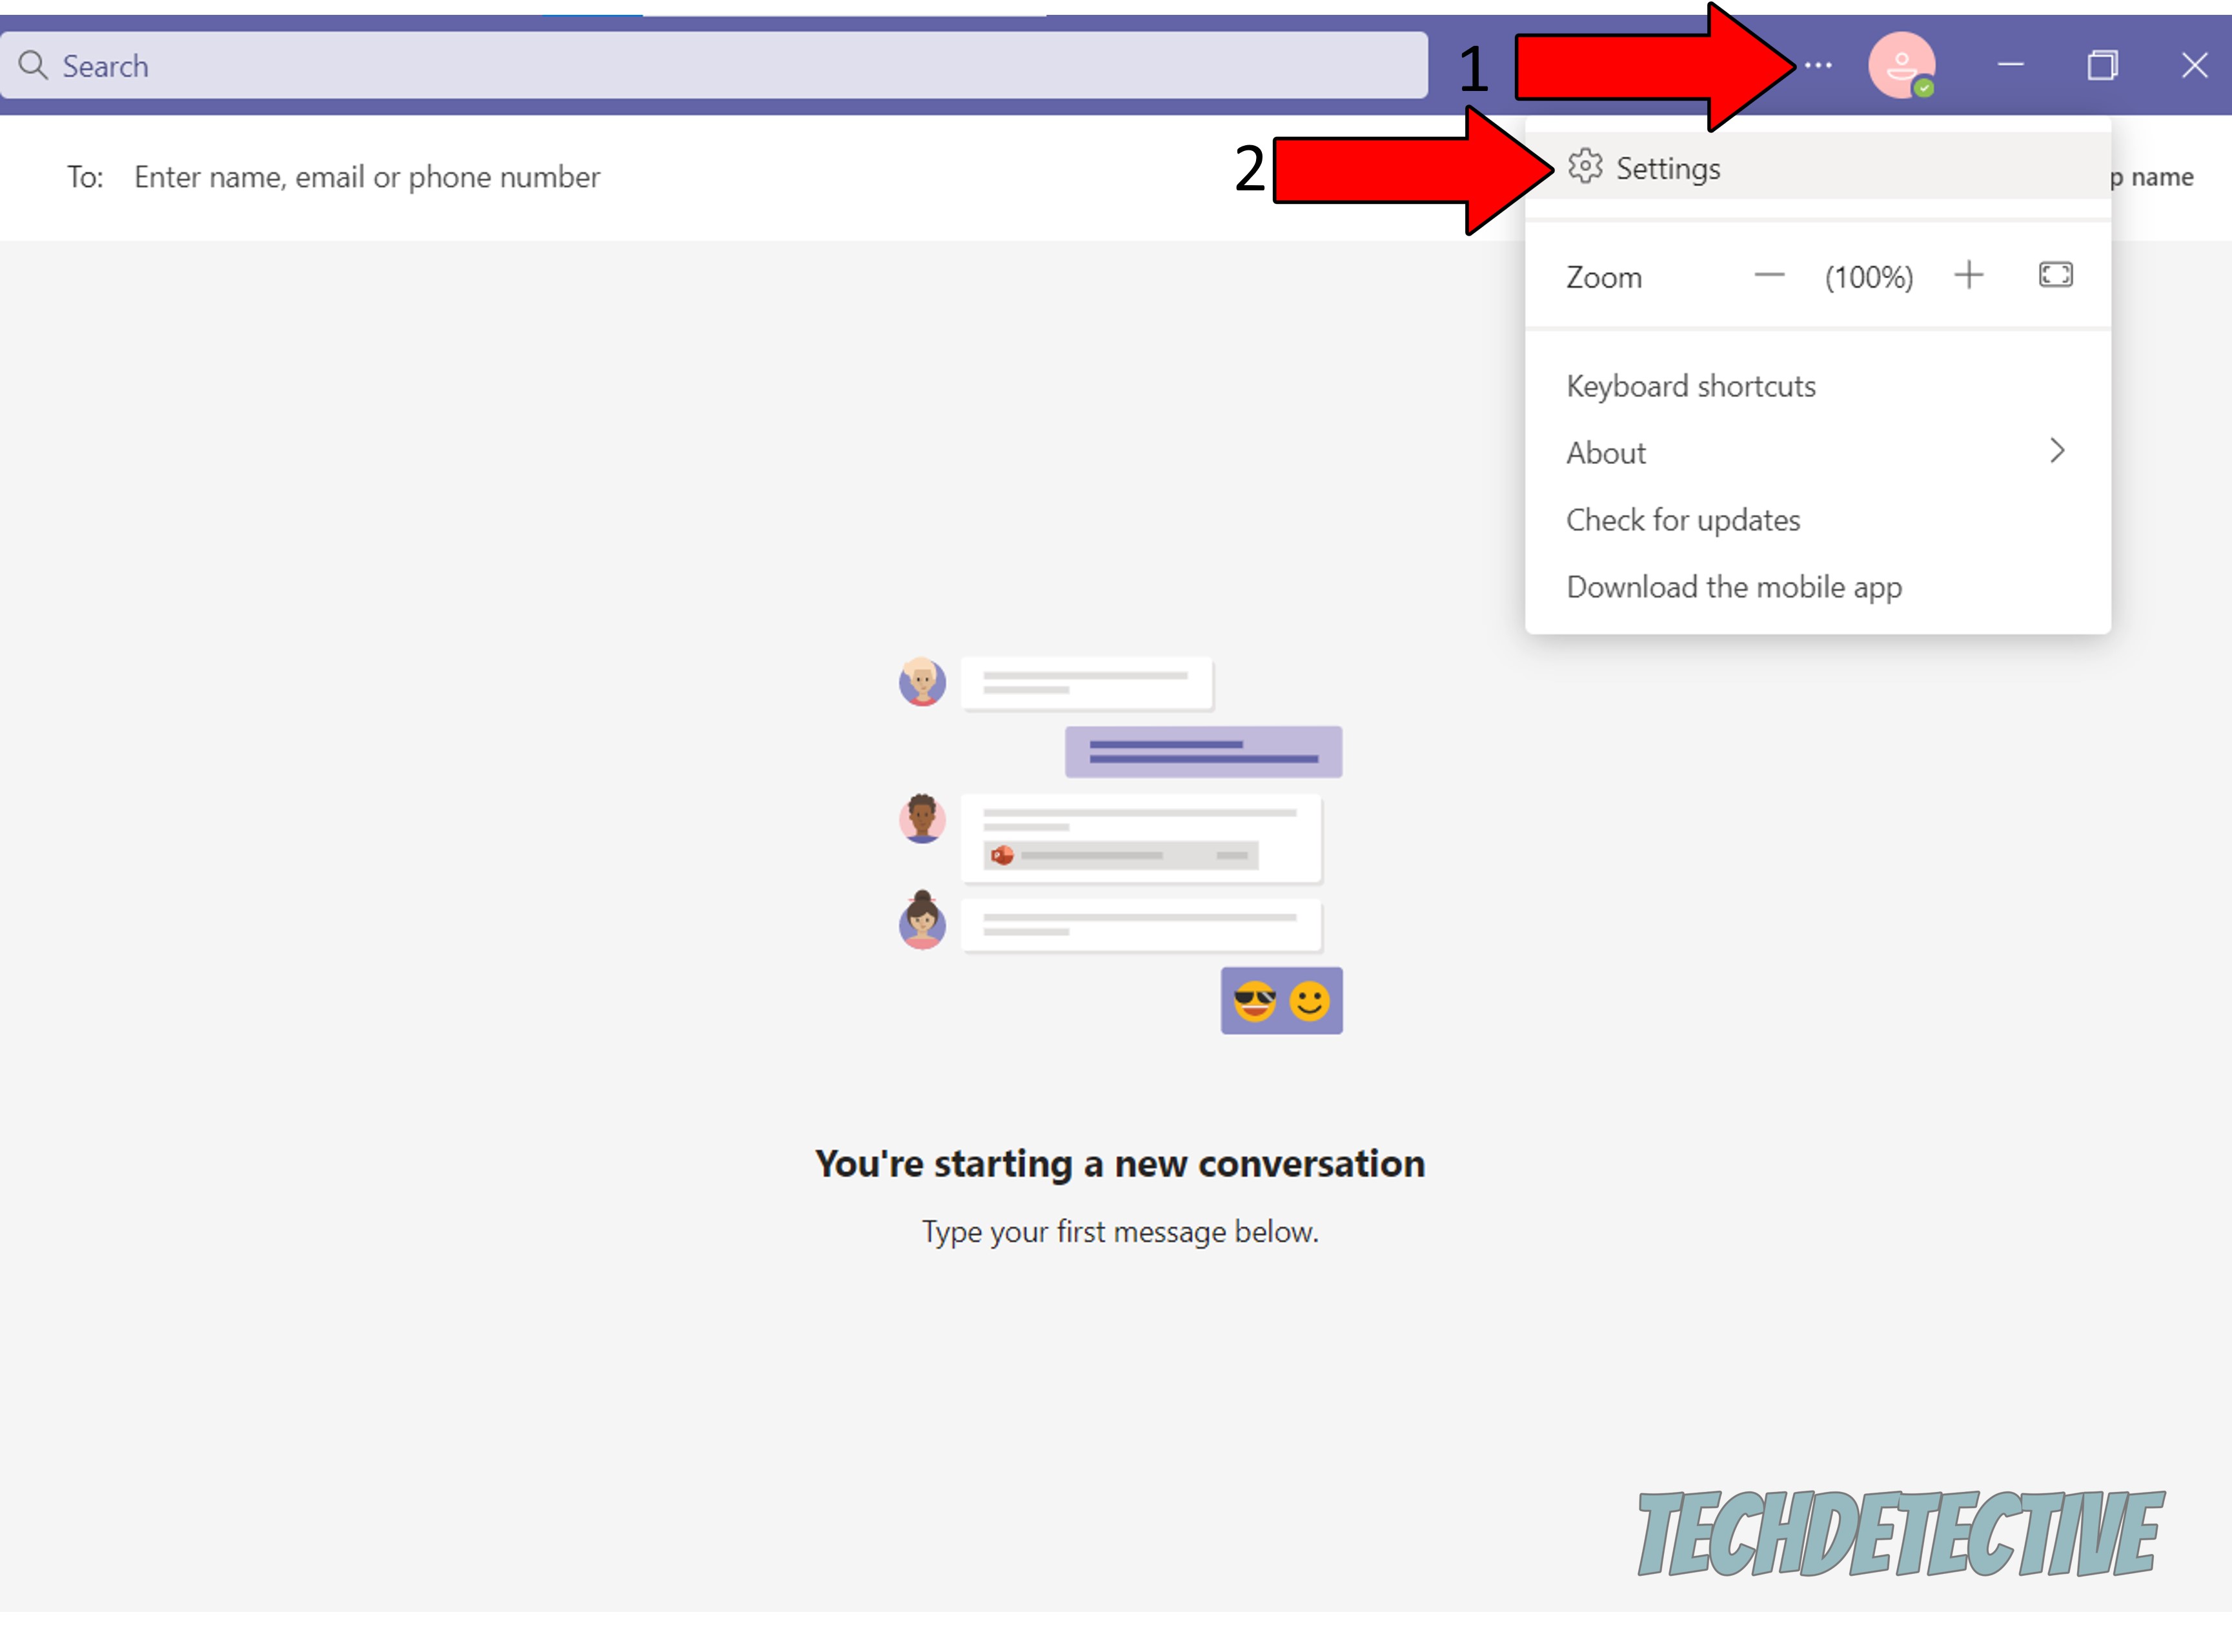 How to access Settings in Microsoft Teams